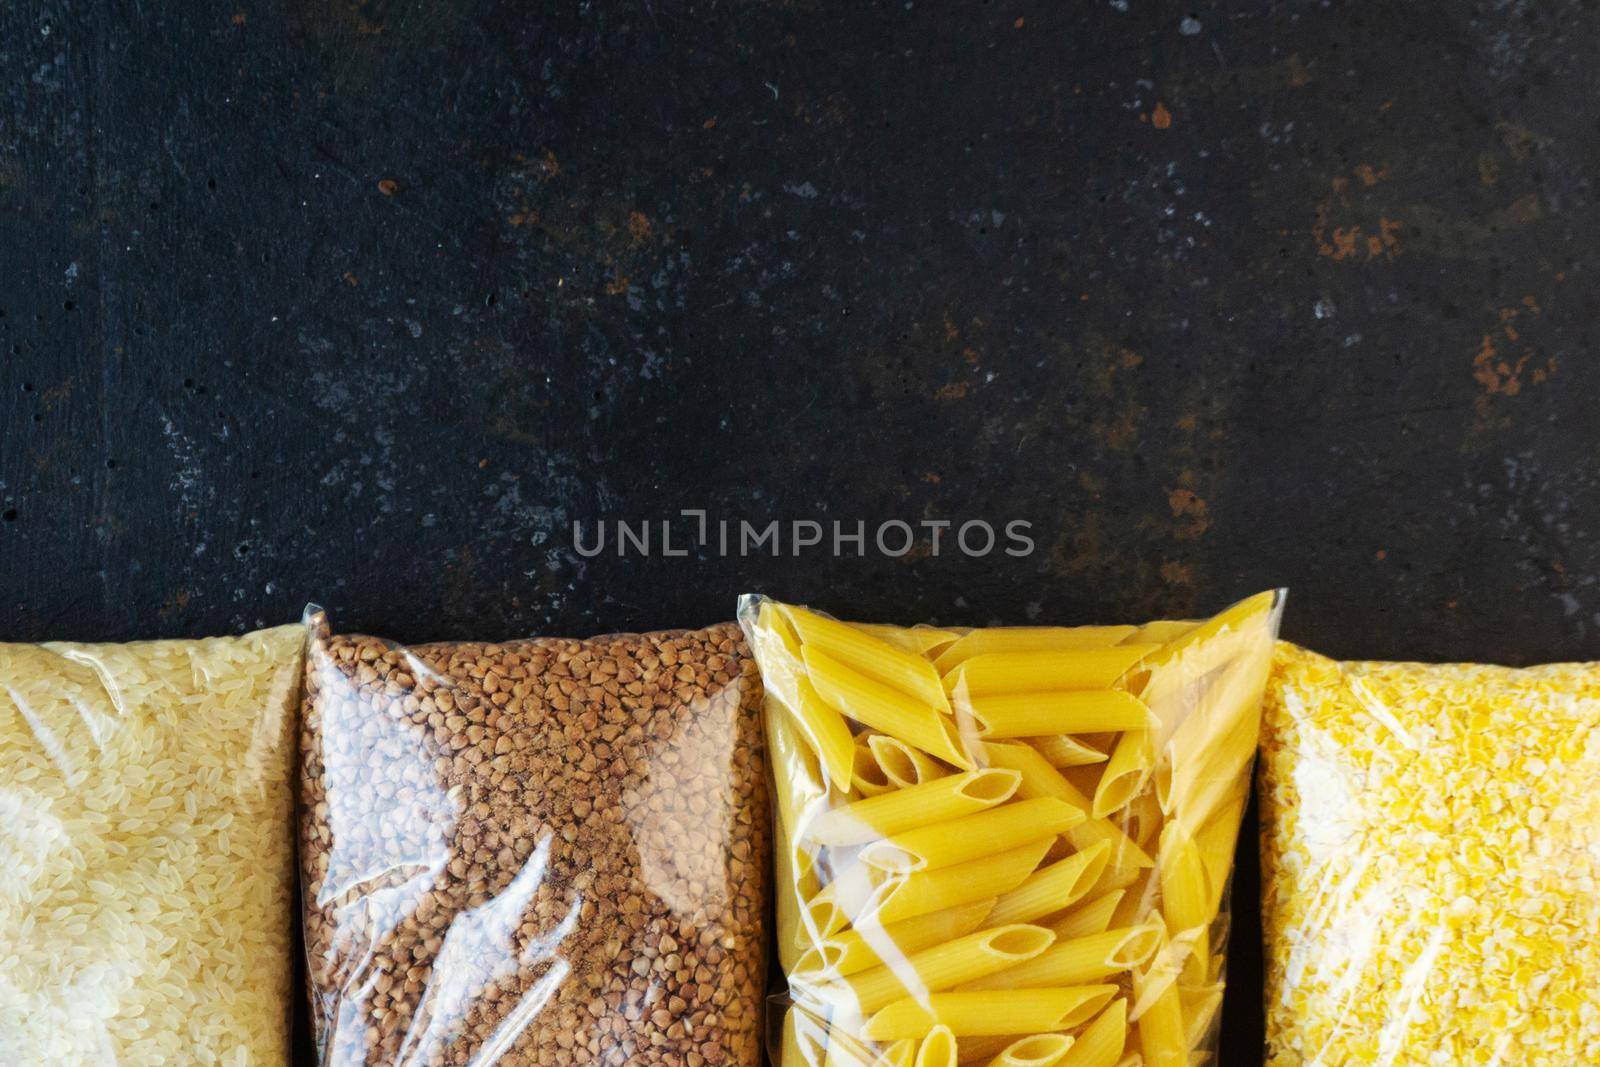 Food supply quarantine food crisis isolated on black concrete background. Rice, pasta, corn flakes, buckwheat. The concept of food delivery, donation, charity. Copyspace.